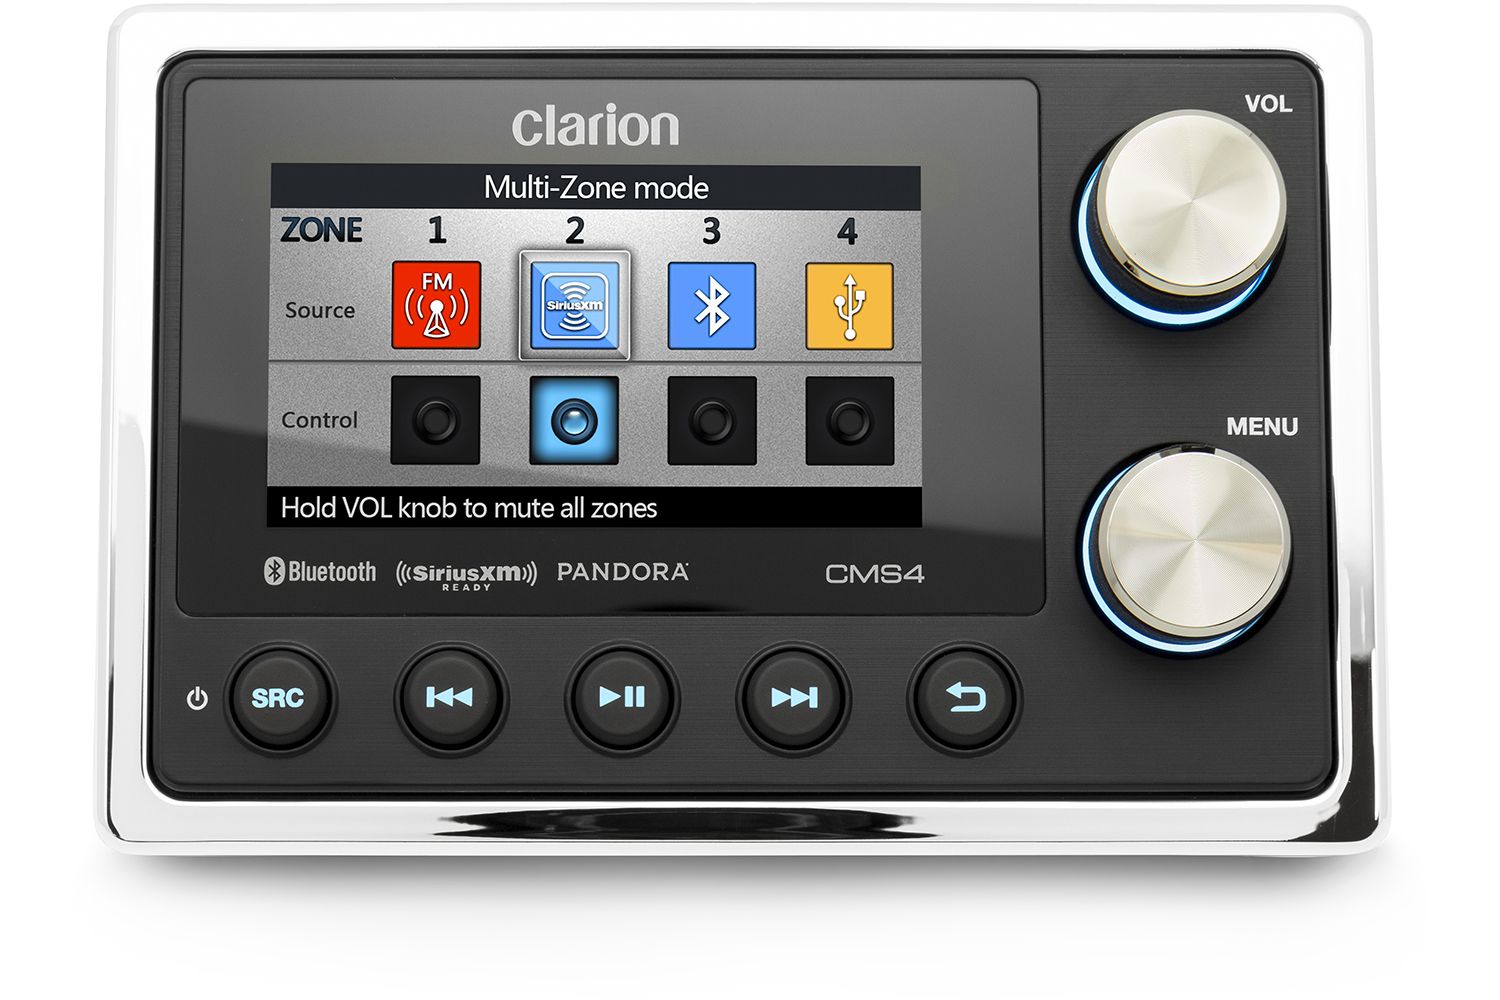 Clarion CMS4